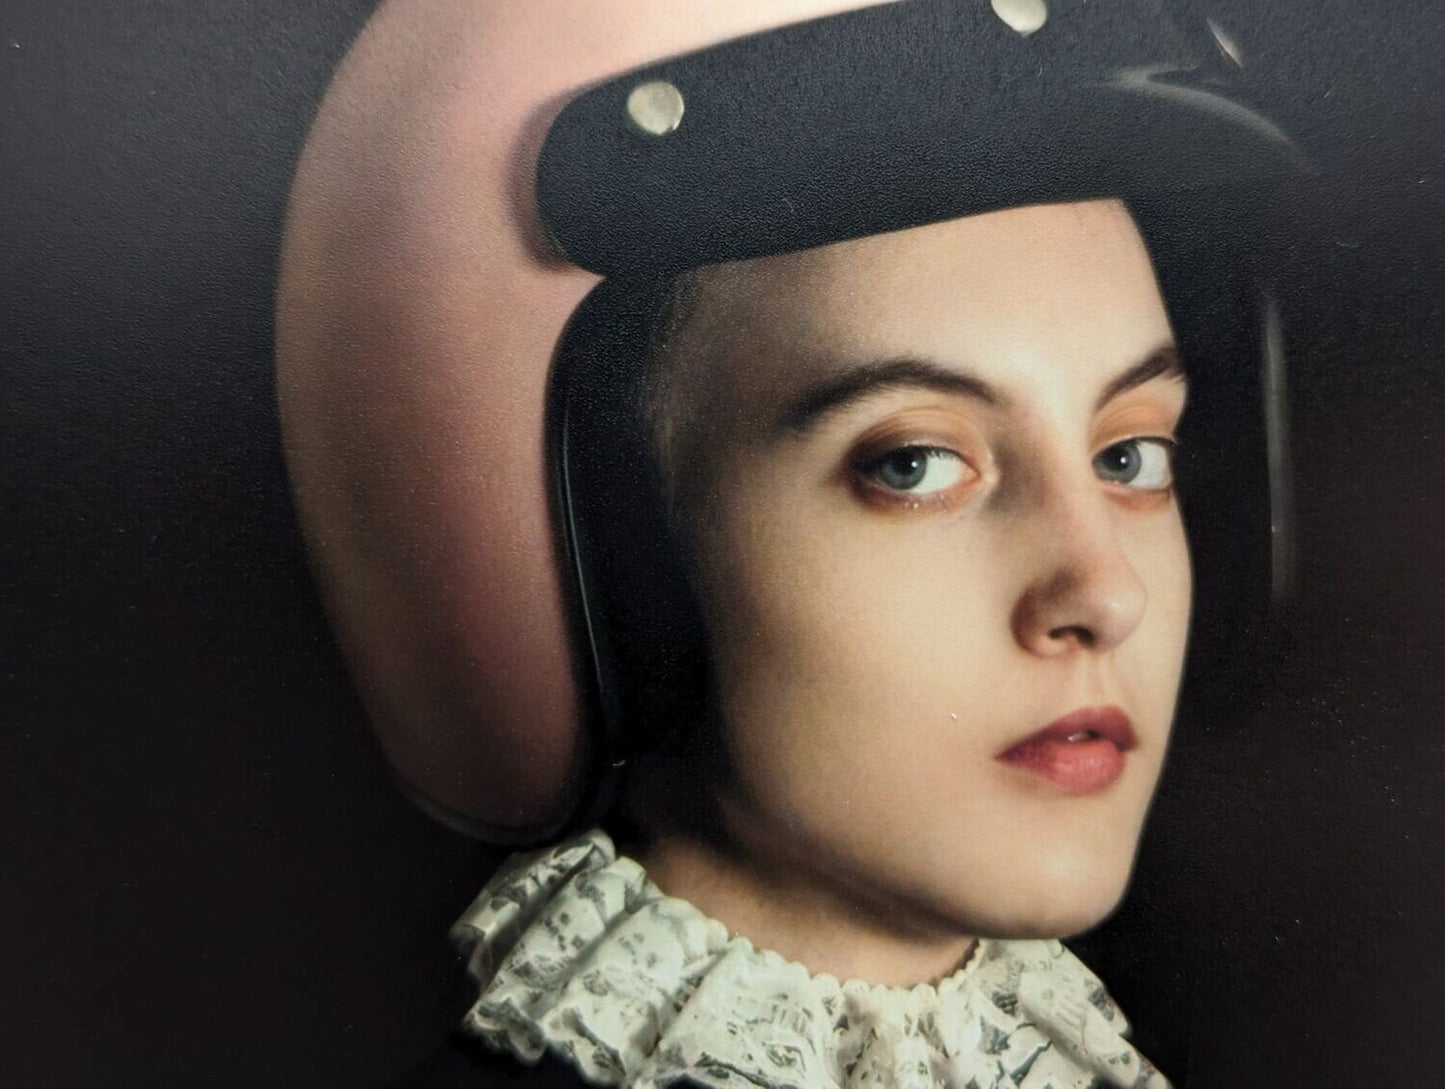 Romina Ressia - Pink Helmet - Sold out edition